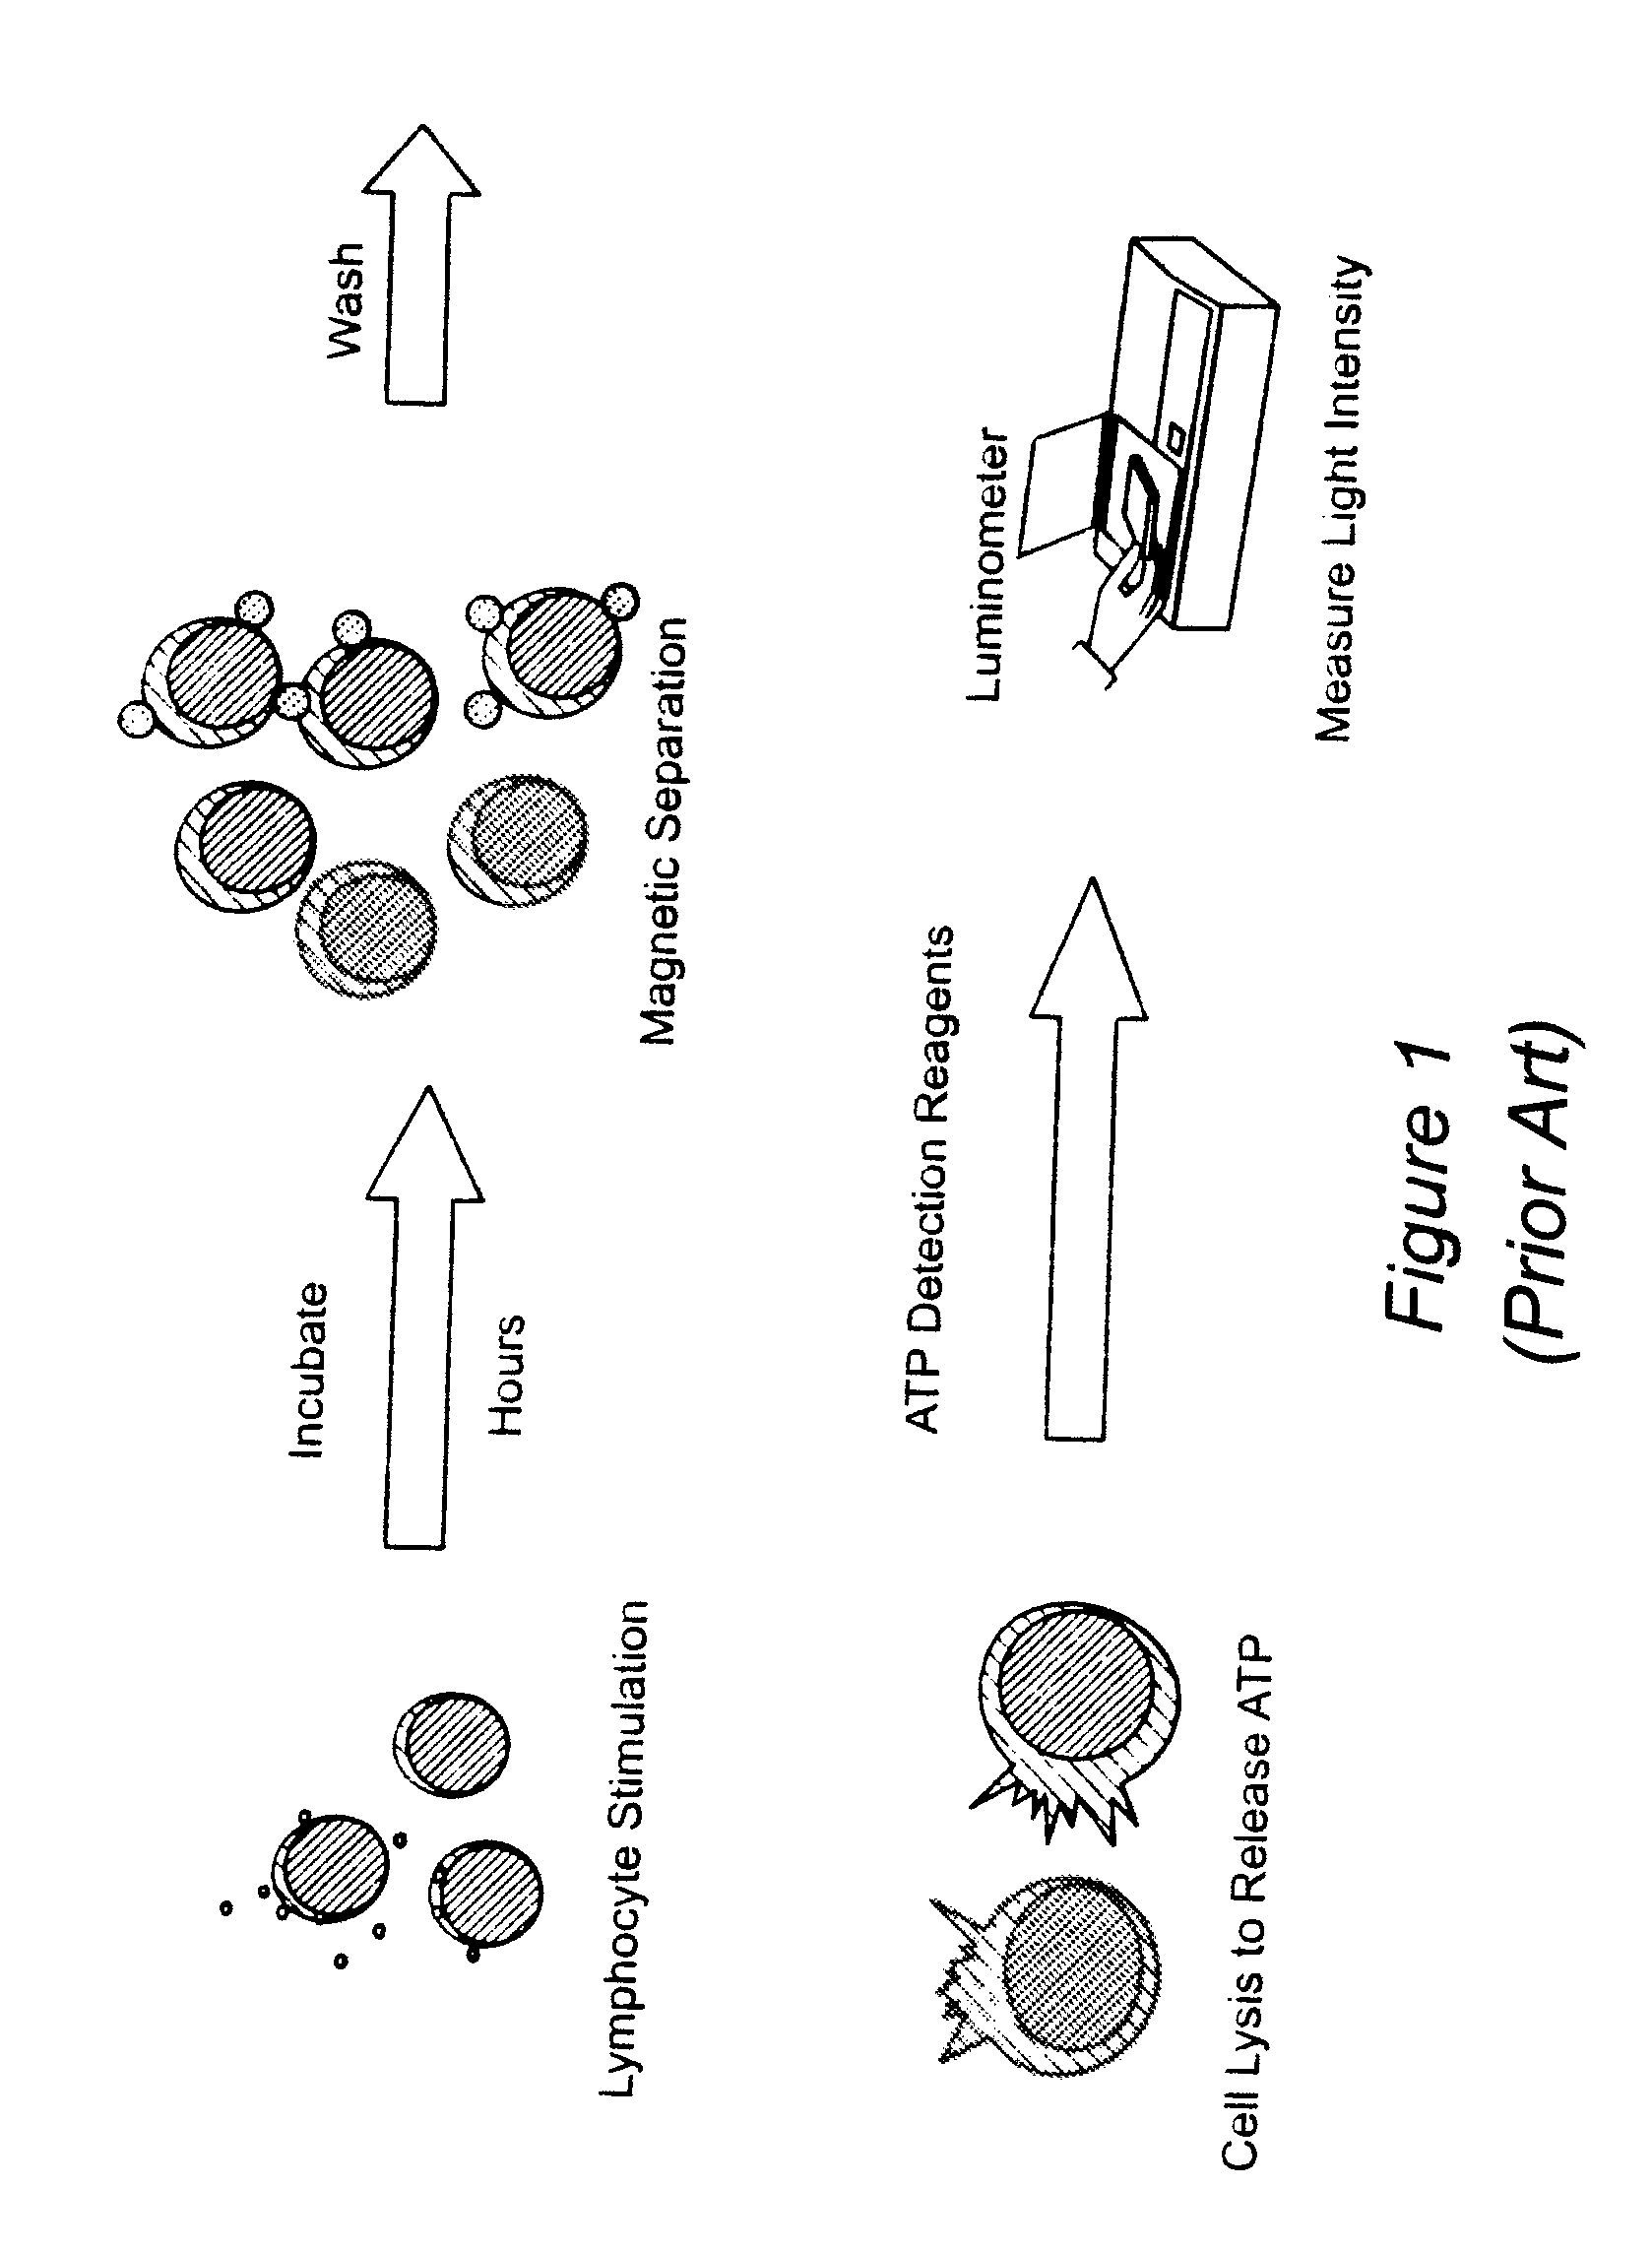 Method for monitoring the immune response and predicting clinical outcomes in transplant recipients